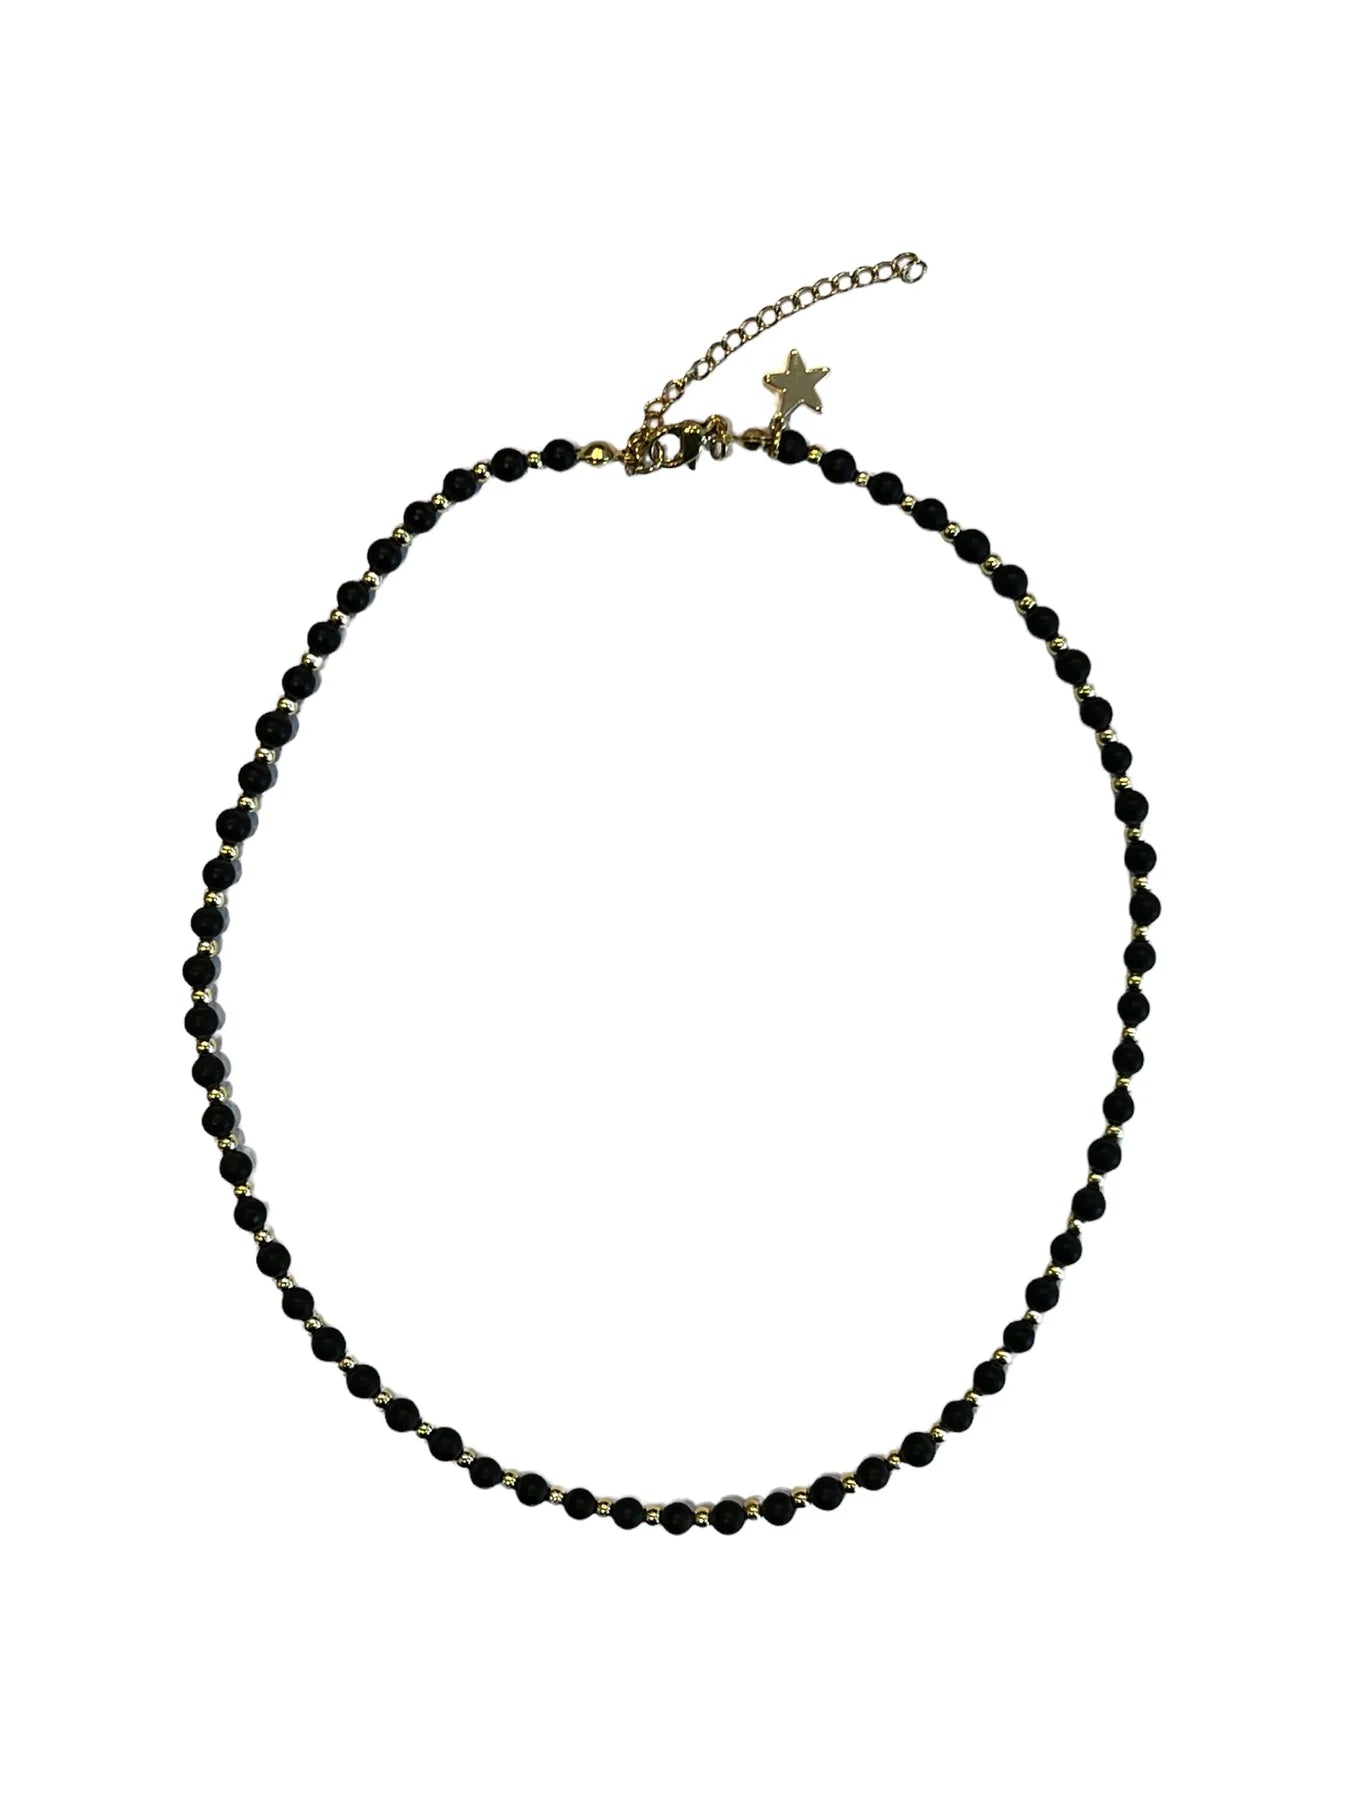 Stone Bead Necklace 4mm W/ Gold Beads Matte Black